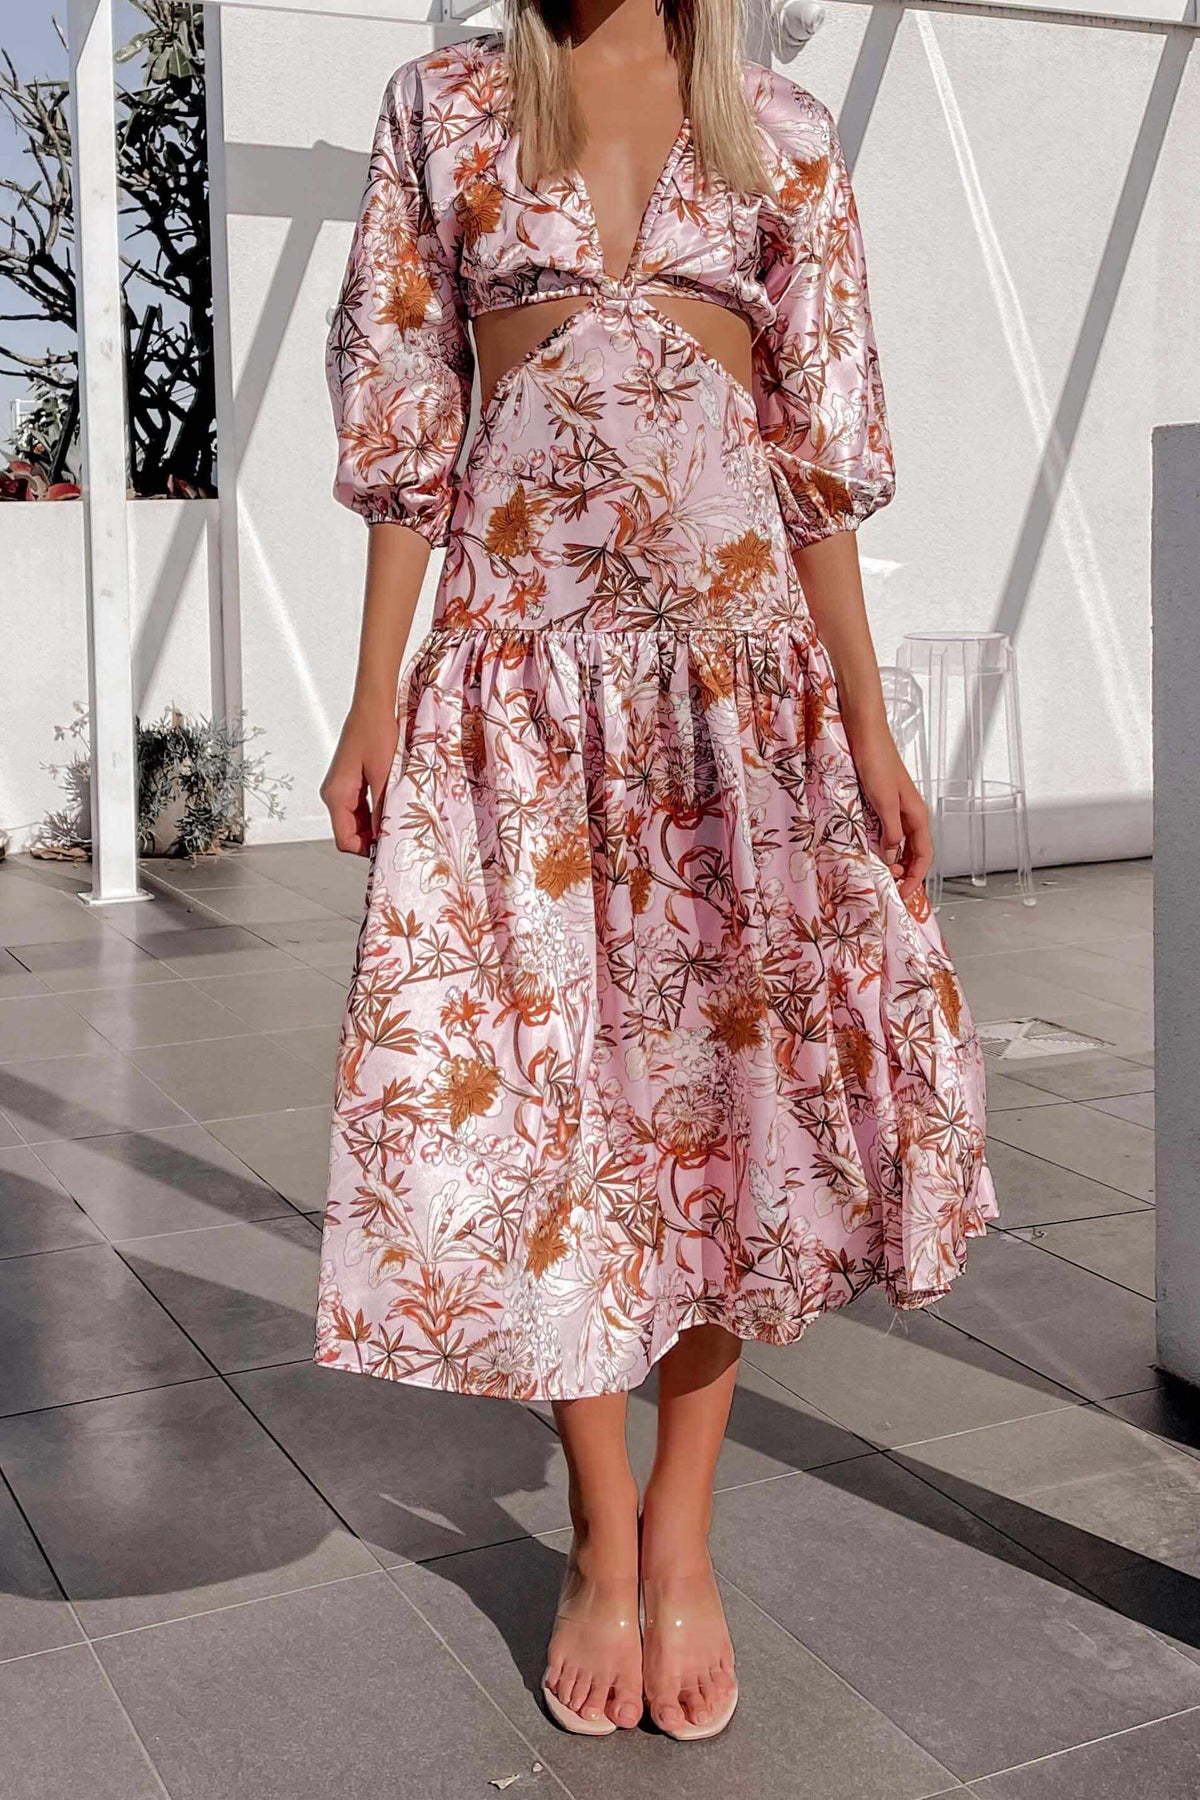 Carmito Dress, CUT OUT, DRESS, DRESSES, FLORAL, MIDI DRESS, PINK, PRINT, Sale, SILKY, SPECIAL OCCASION, Carmito Dress only $79.00 @ MISHKAH ONLINE FASHION BOUTIQUE, Shop The Latest Women&#39;s Dresses - Our New Carmito Dress is only $79.00, @ MISHKAH ONLINE FASHION BOUTIQUE-MISHKAH